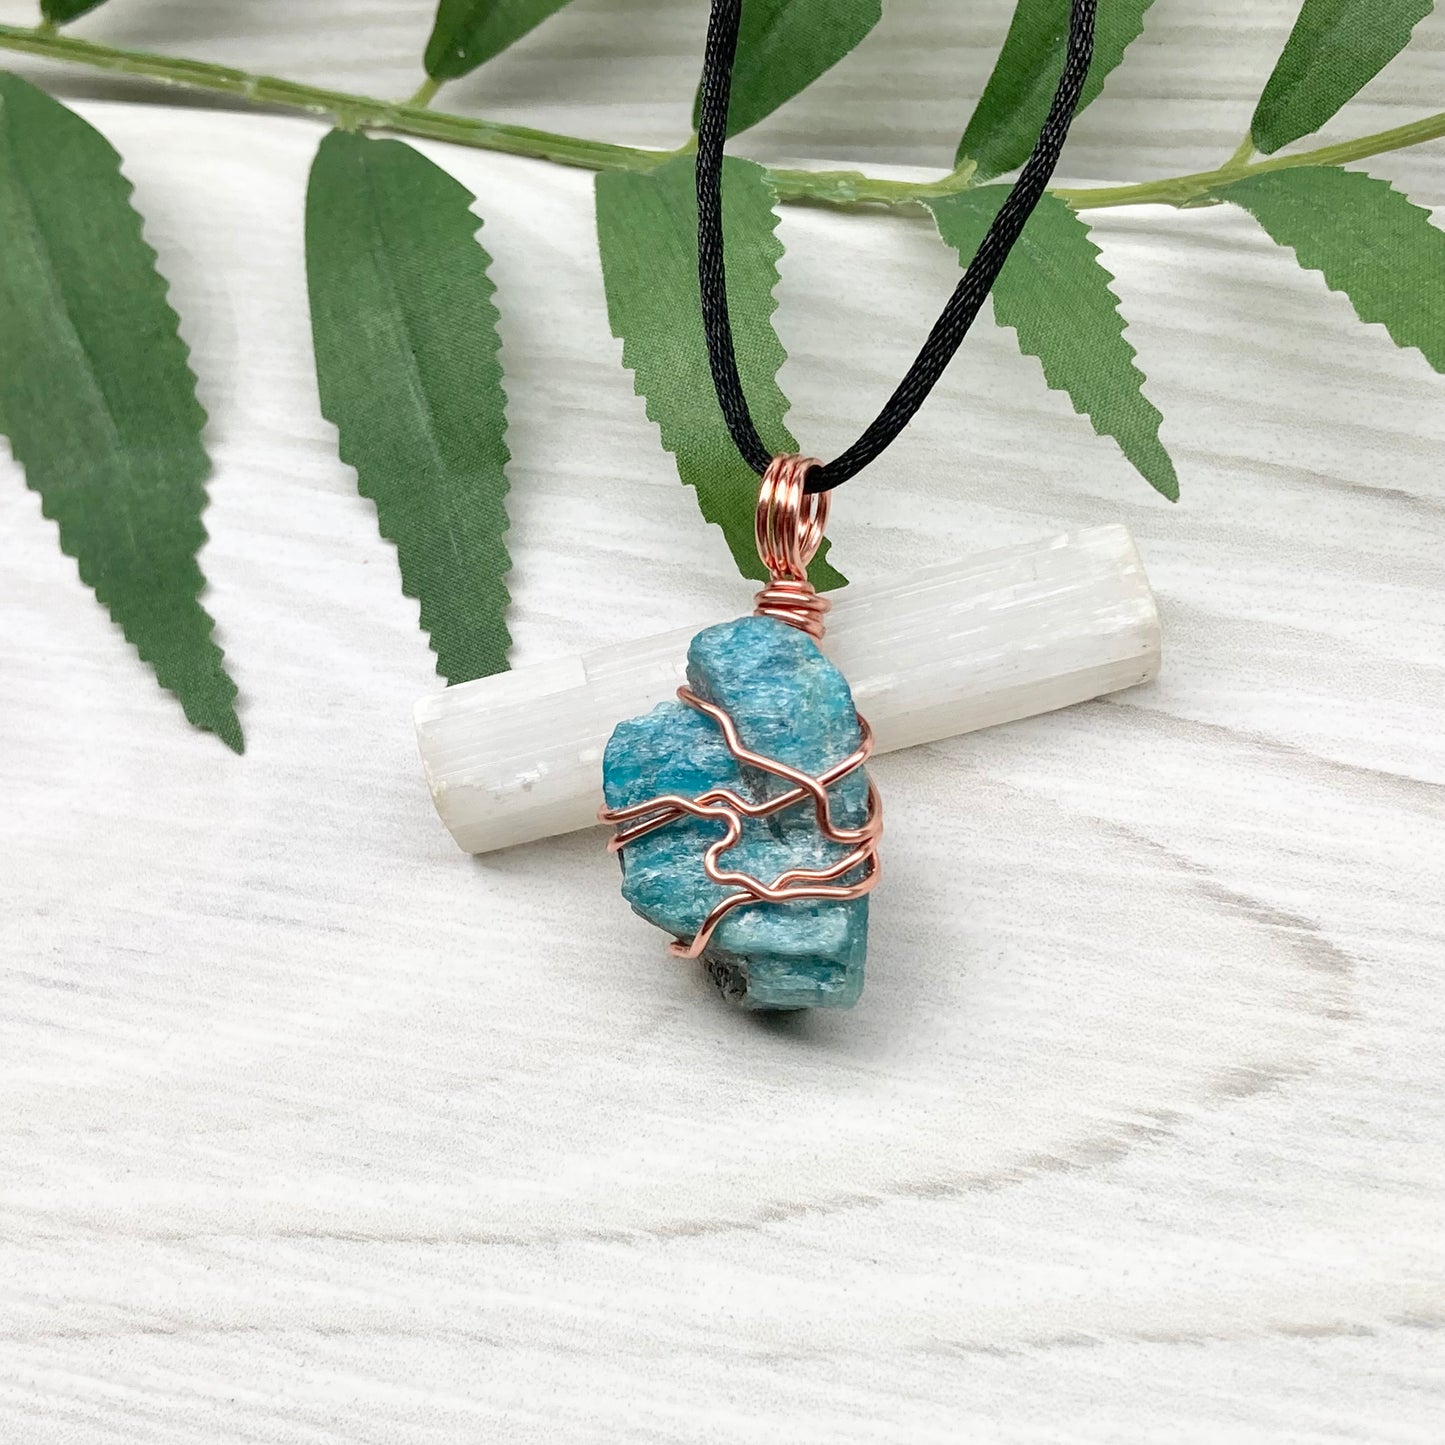 Blue Apatite Necklace. Raw Blue Apatite Stone Wrapped With Tarnish Resistant Copper Wire. This Pendant Was Handcrafted During The Moon In Scorpio. Comes On A Black Chain. Spiritual Jewelry For Him Or Her.